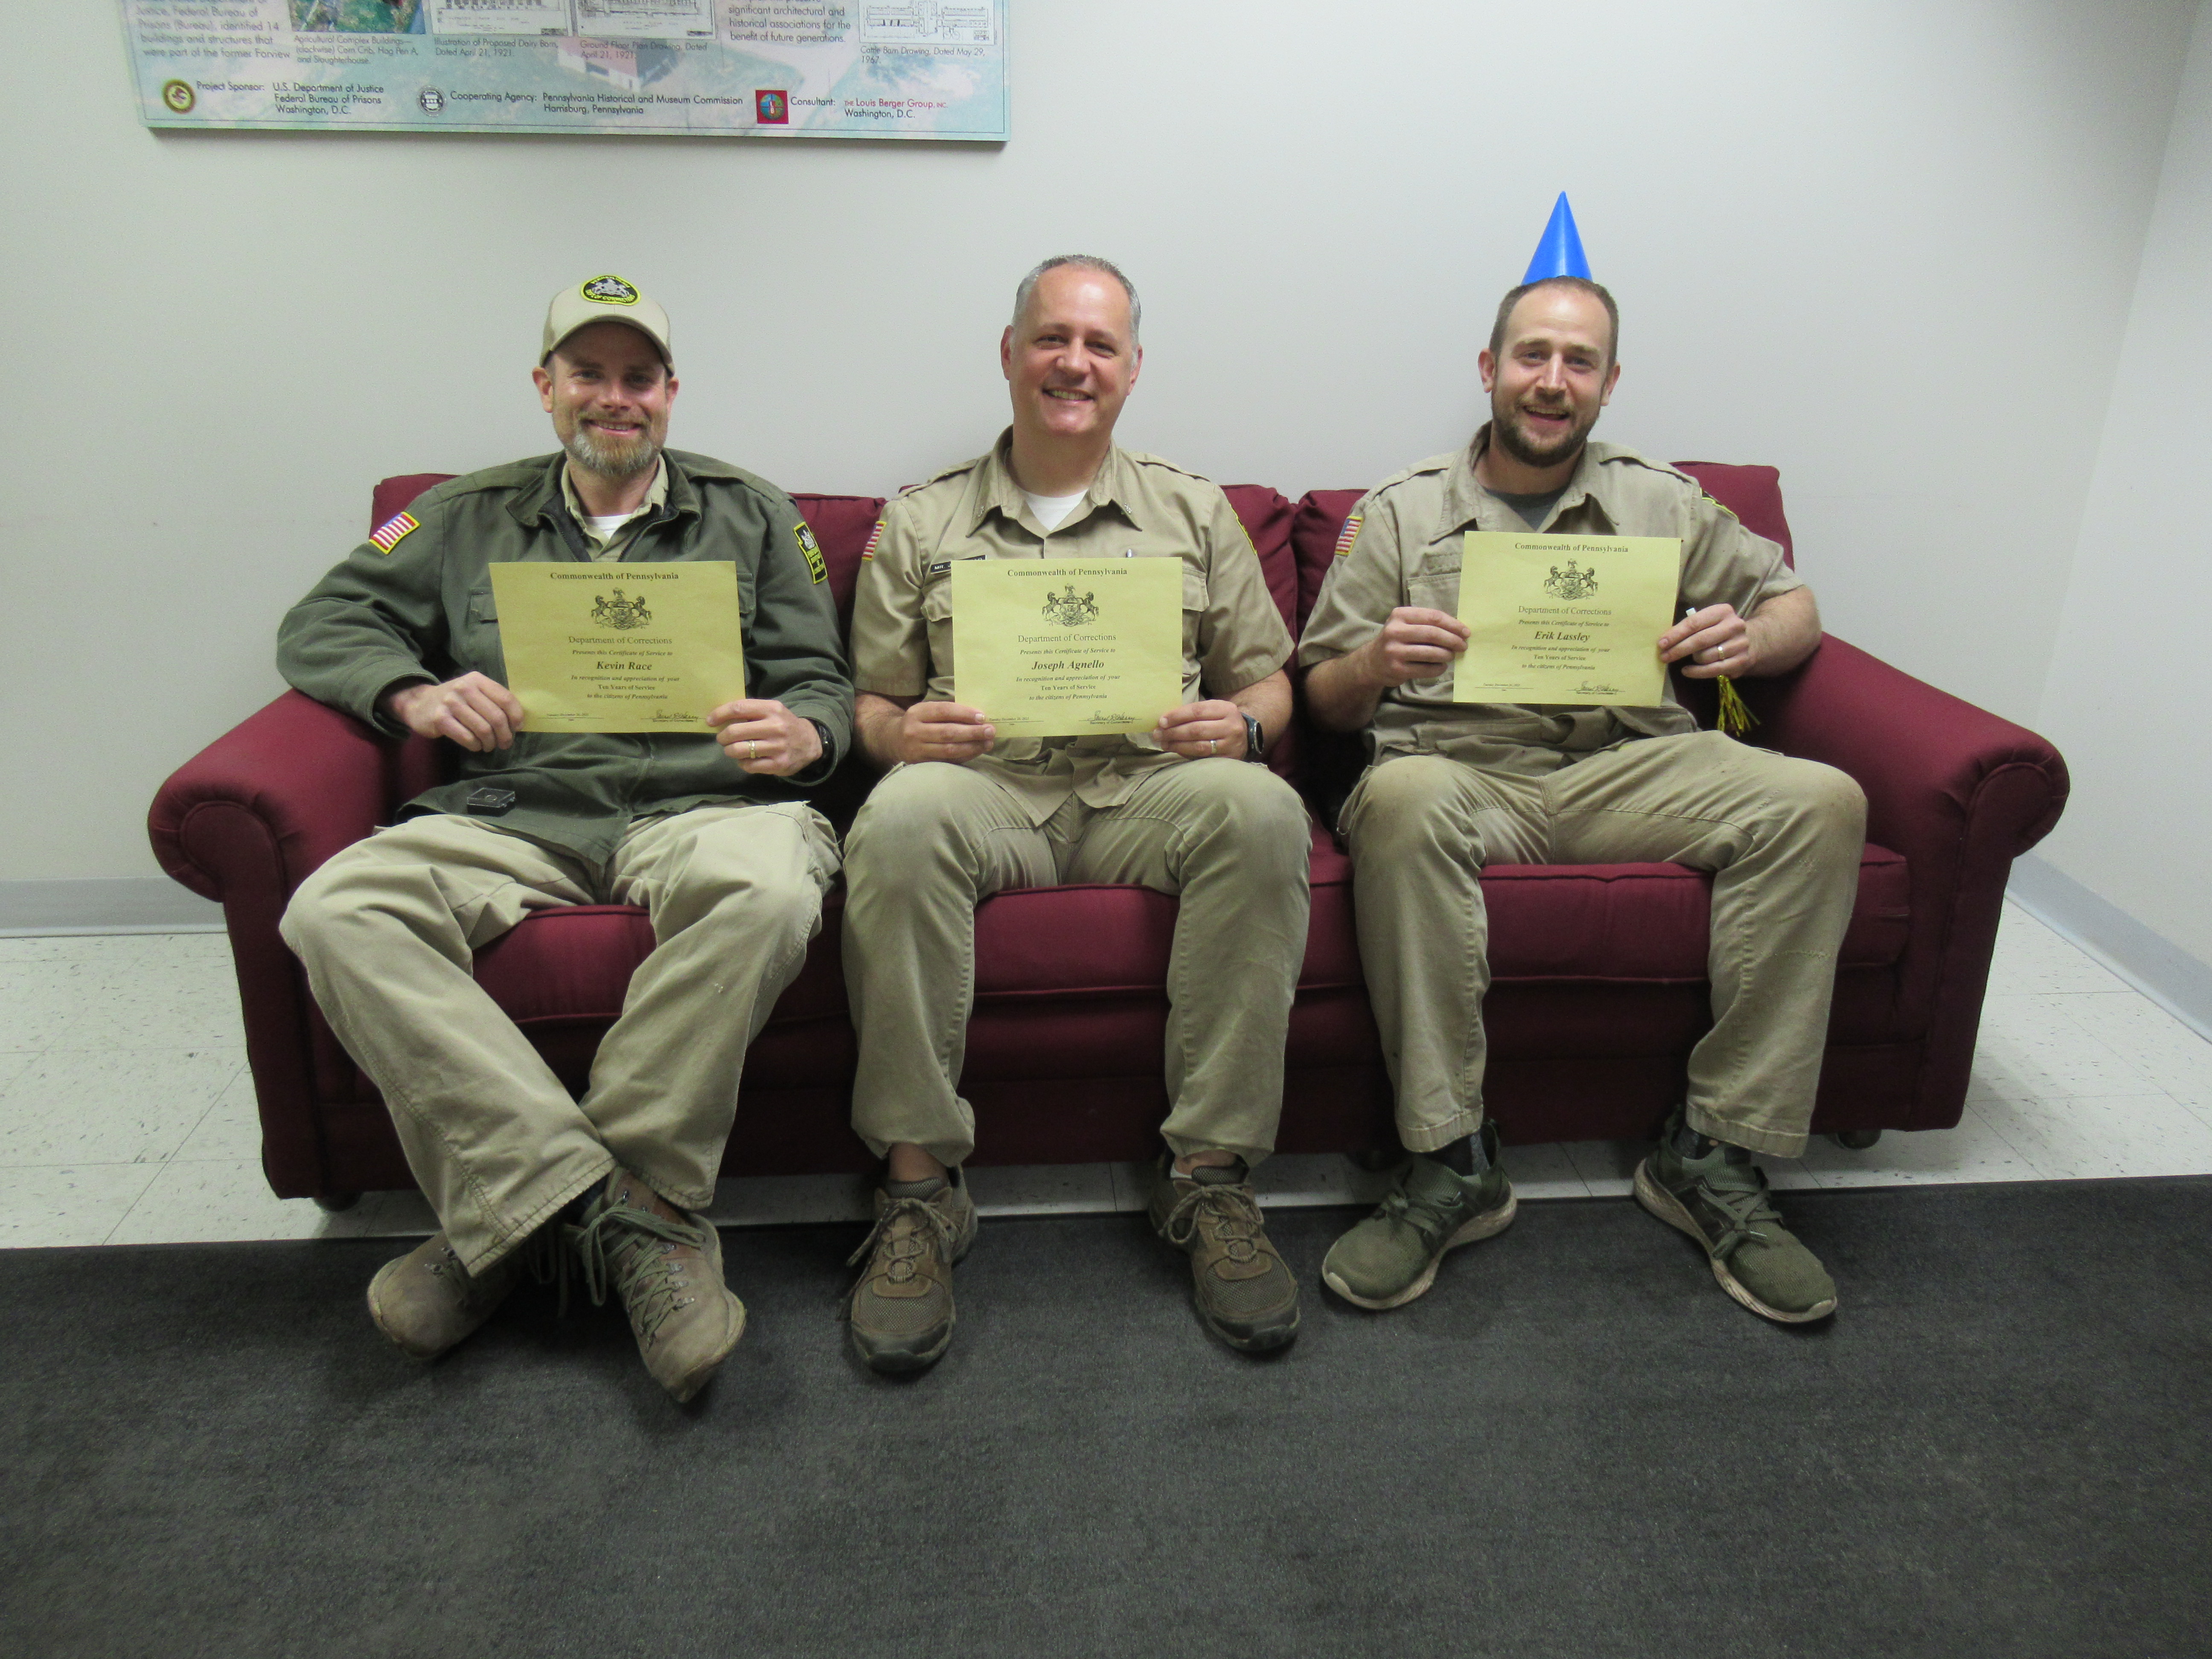 Kevin Race, Joe Agnello and Erik Lassley sit on a couch holding certificates